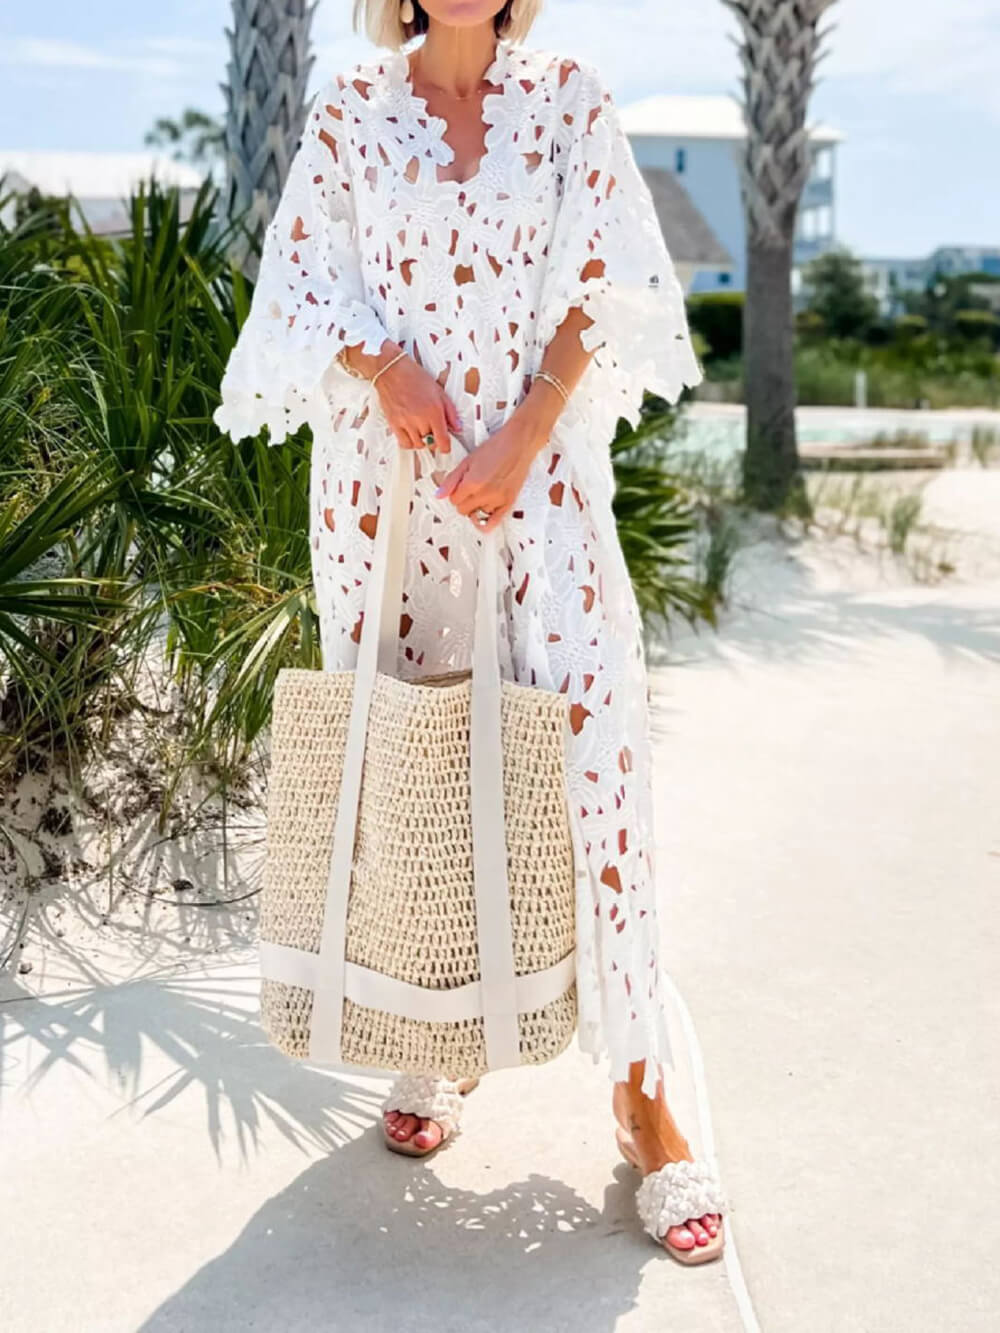 Floral Eyelet Lace Cover Up Beach Midi Dress